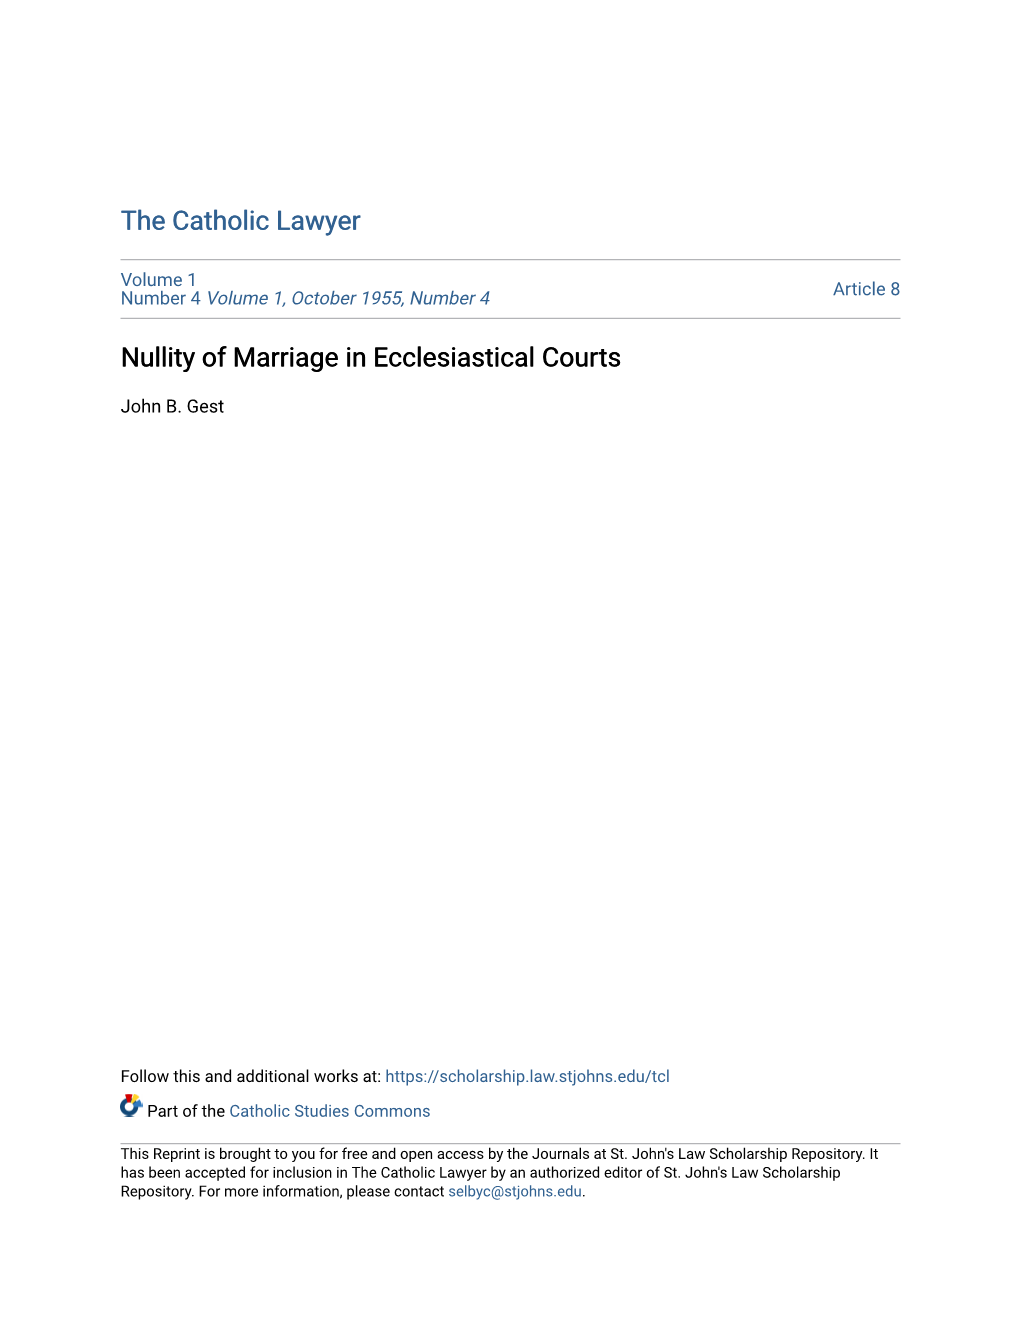 Nullity of Marriage in Ecclesiastical Courts